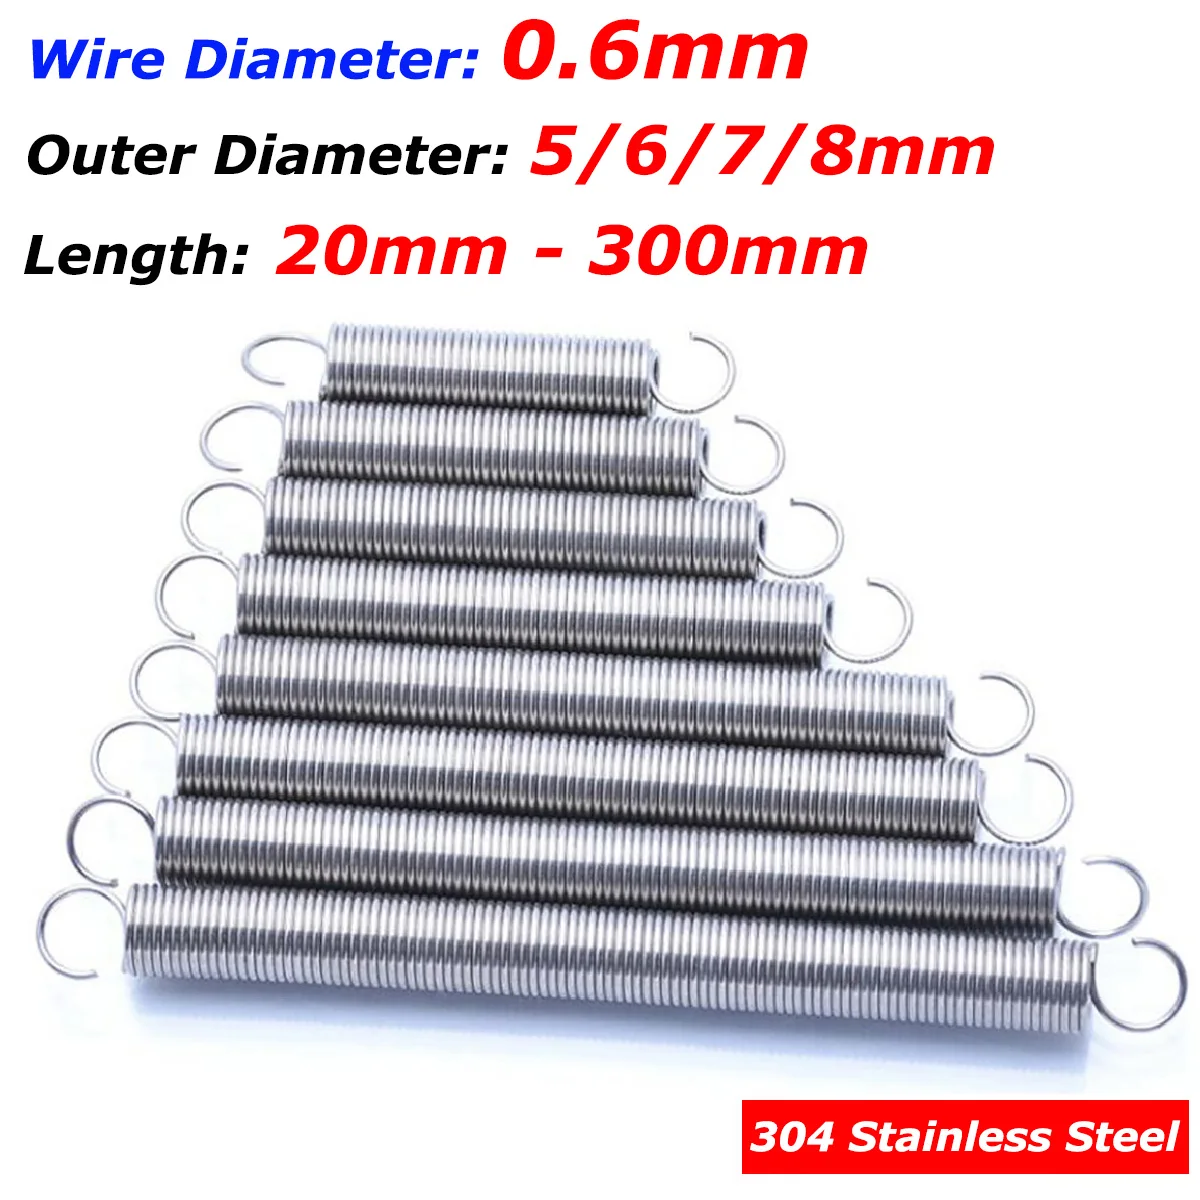 

304 Stainless Steel Wire Dia 0.6mm Open S Hook Tension Spring Coil Extension Springs Outer Dia 5/6/7/8mm Length 20mm - 300mm